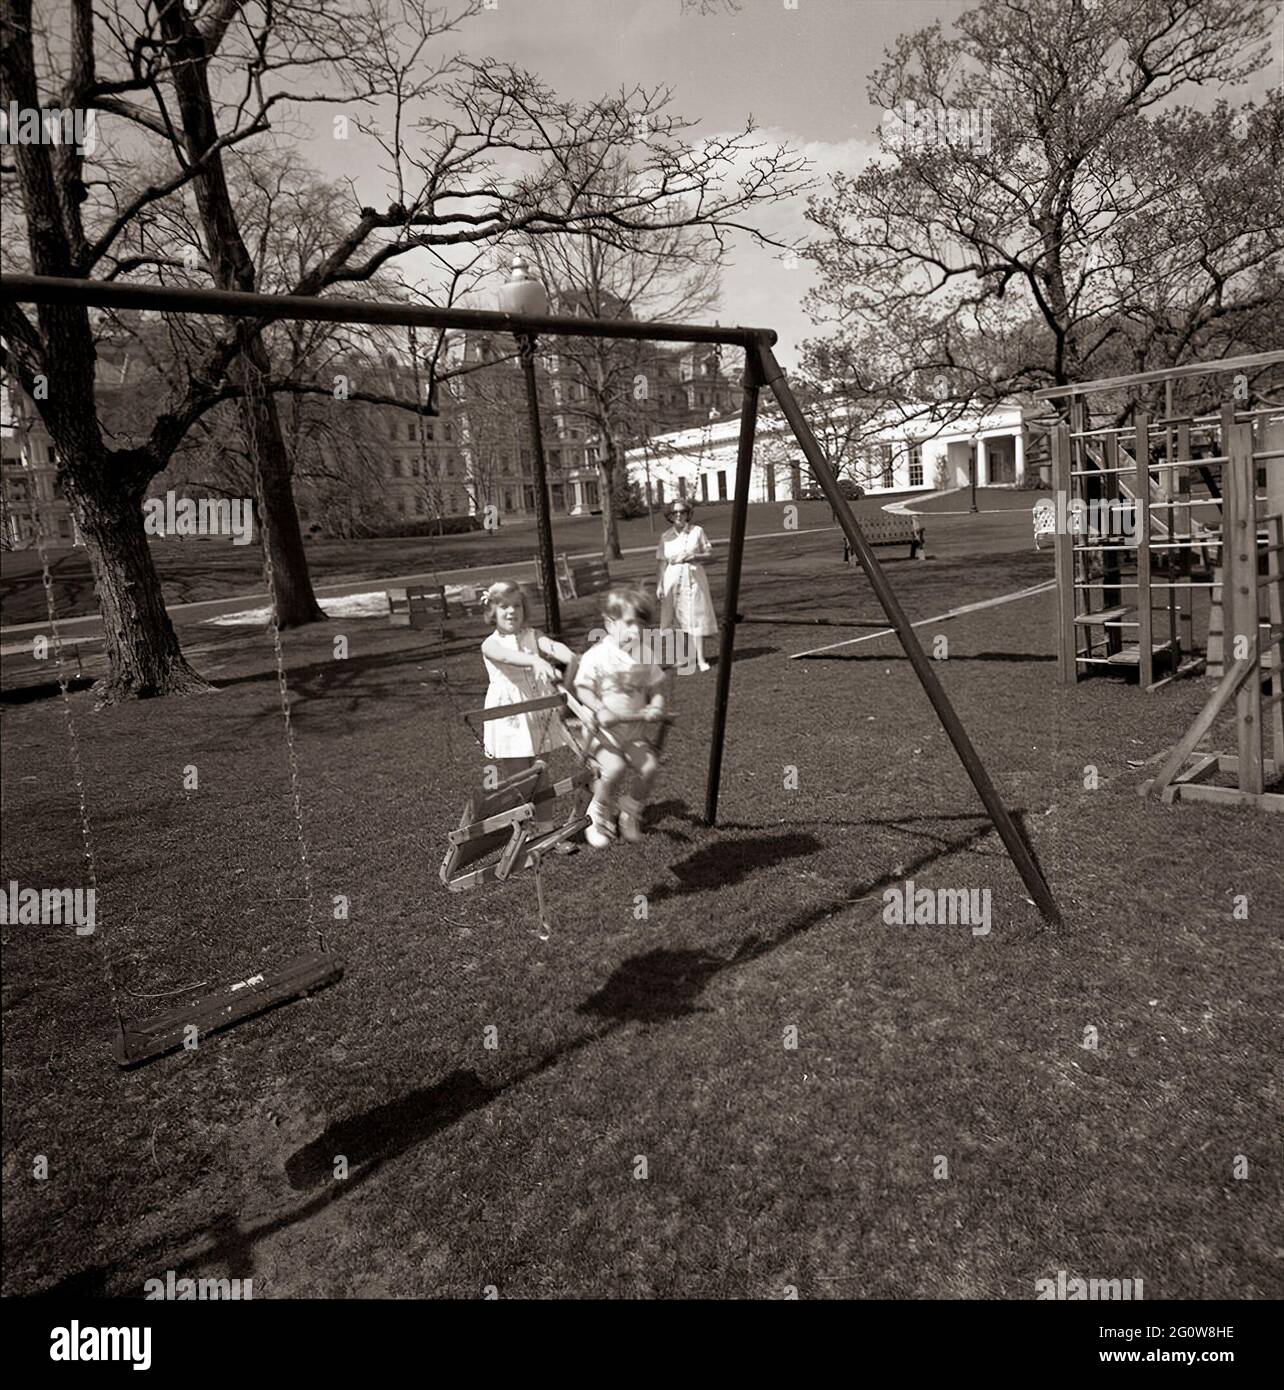 ST-C66-14-63                                                       1 April 1963  Caroline Kennedy and John F. Kennedy, Jr. playing on a swingset. South Lawn, White House, Washington, D.C.  Please credit 'Cecil Stoughton. White House Photographs. John F. Kennedy Presidential Library and Museum, Boston' Stock Photo